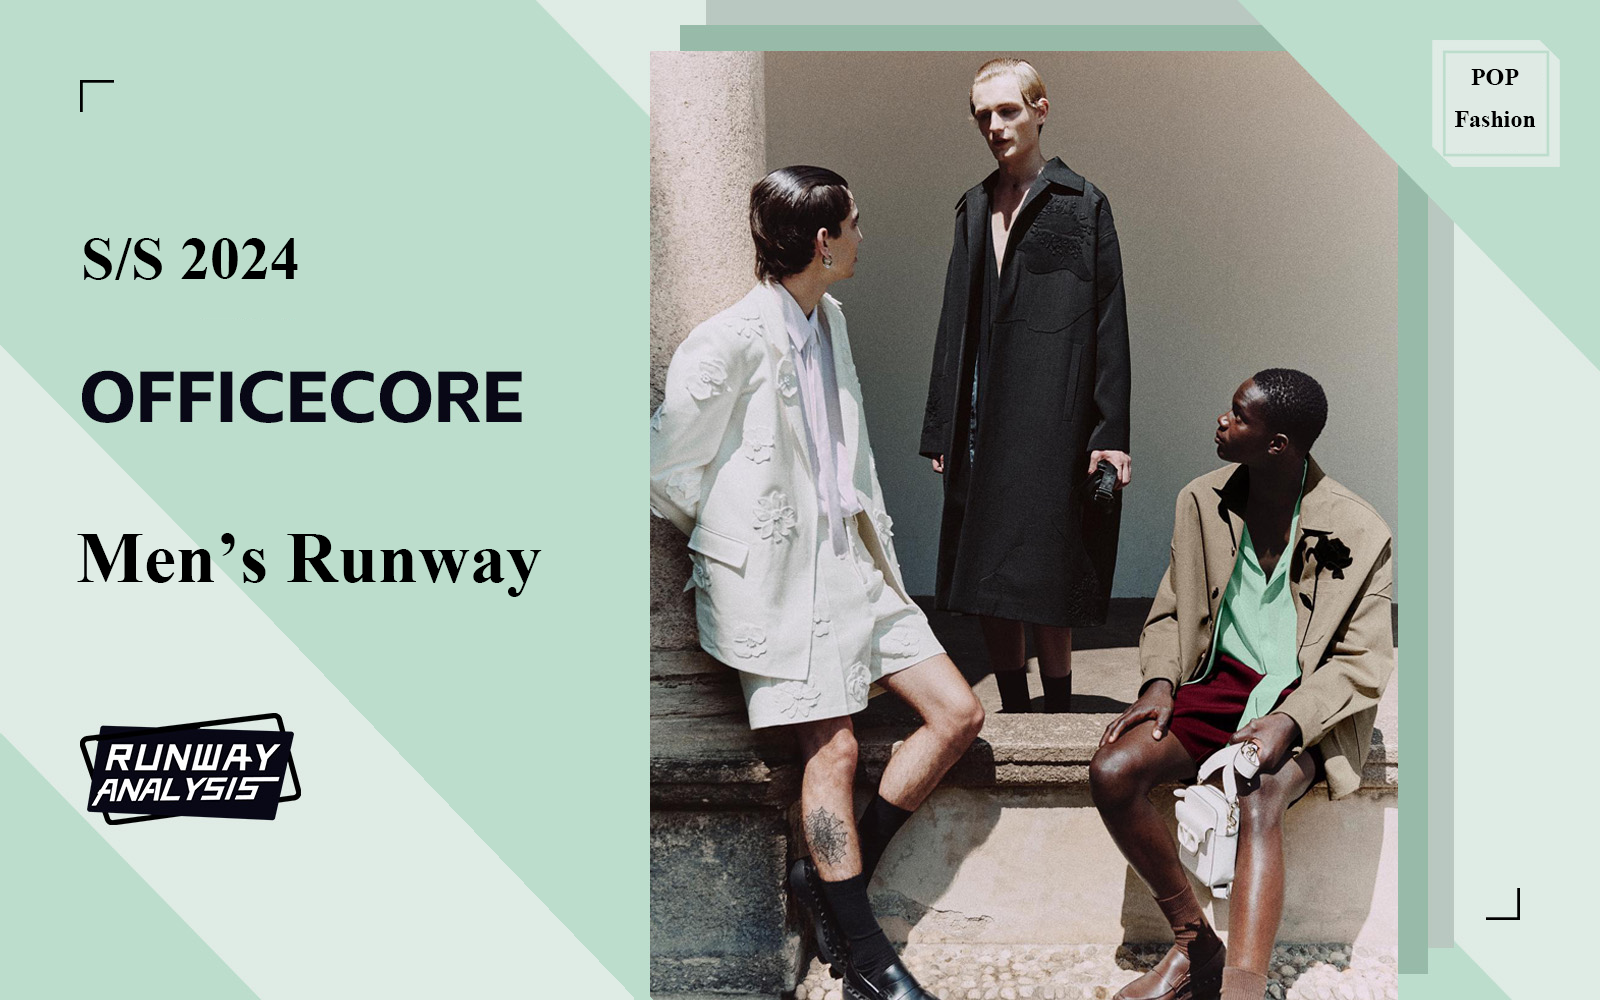 Officecore -- The Comprehensive Analysis of Menswear Runway